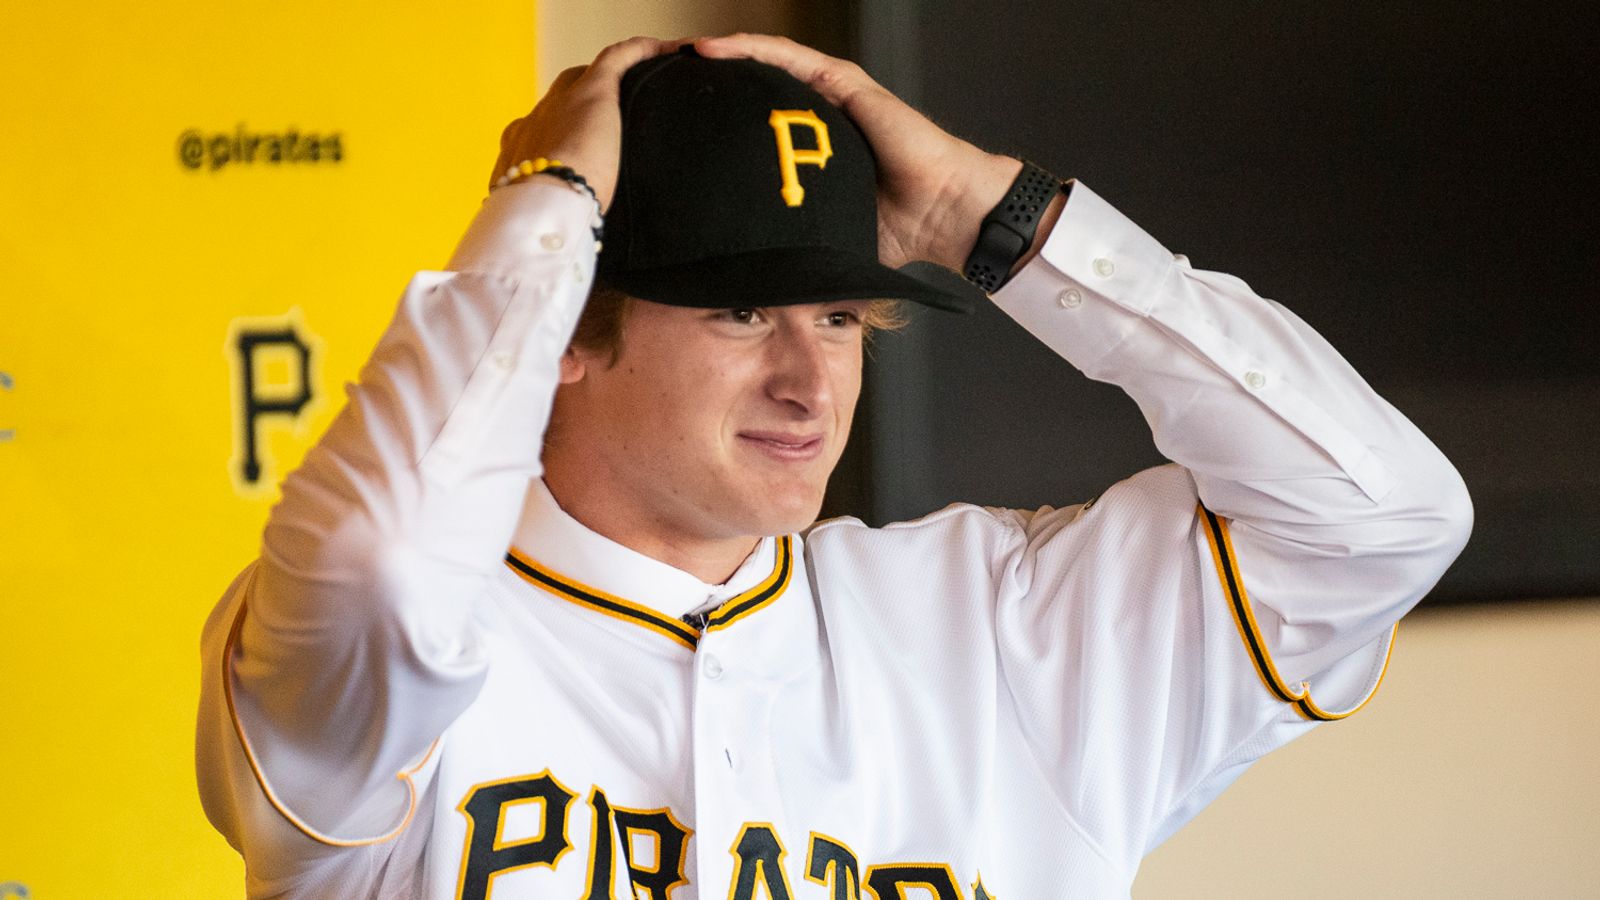 Ranking All the Pittsburgh Pirates Uniforms From Worst To Best